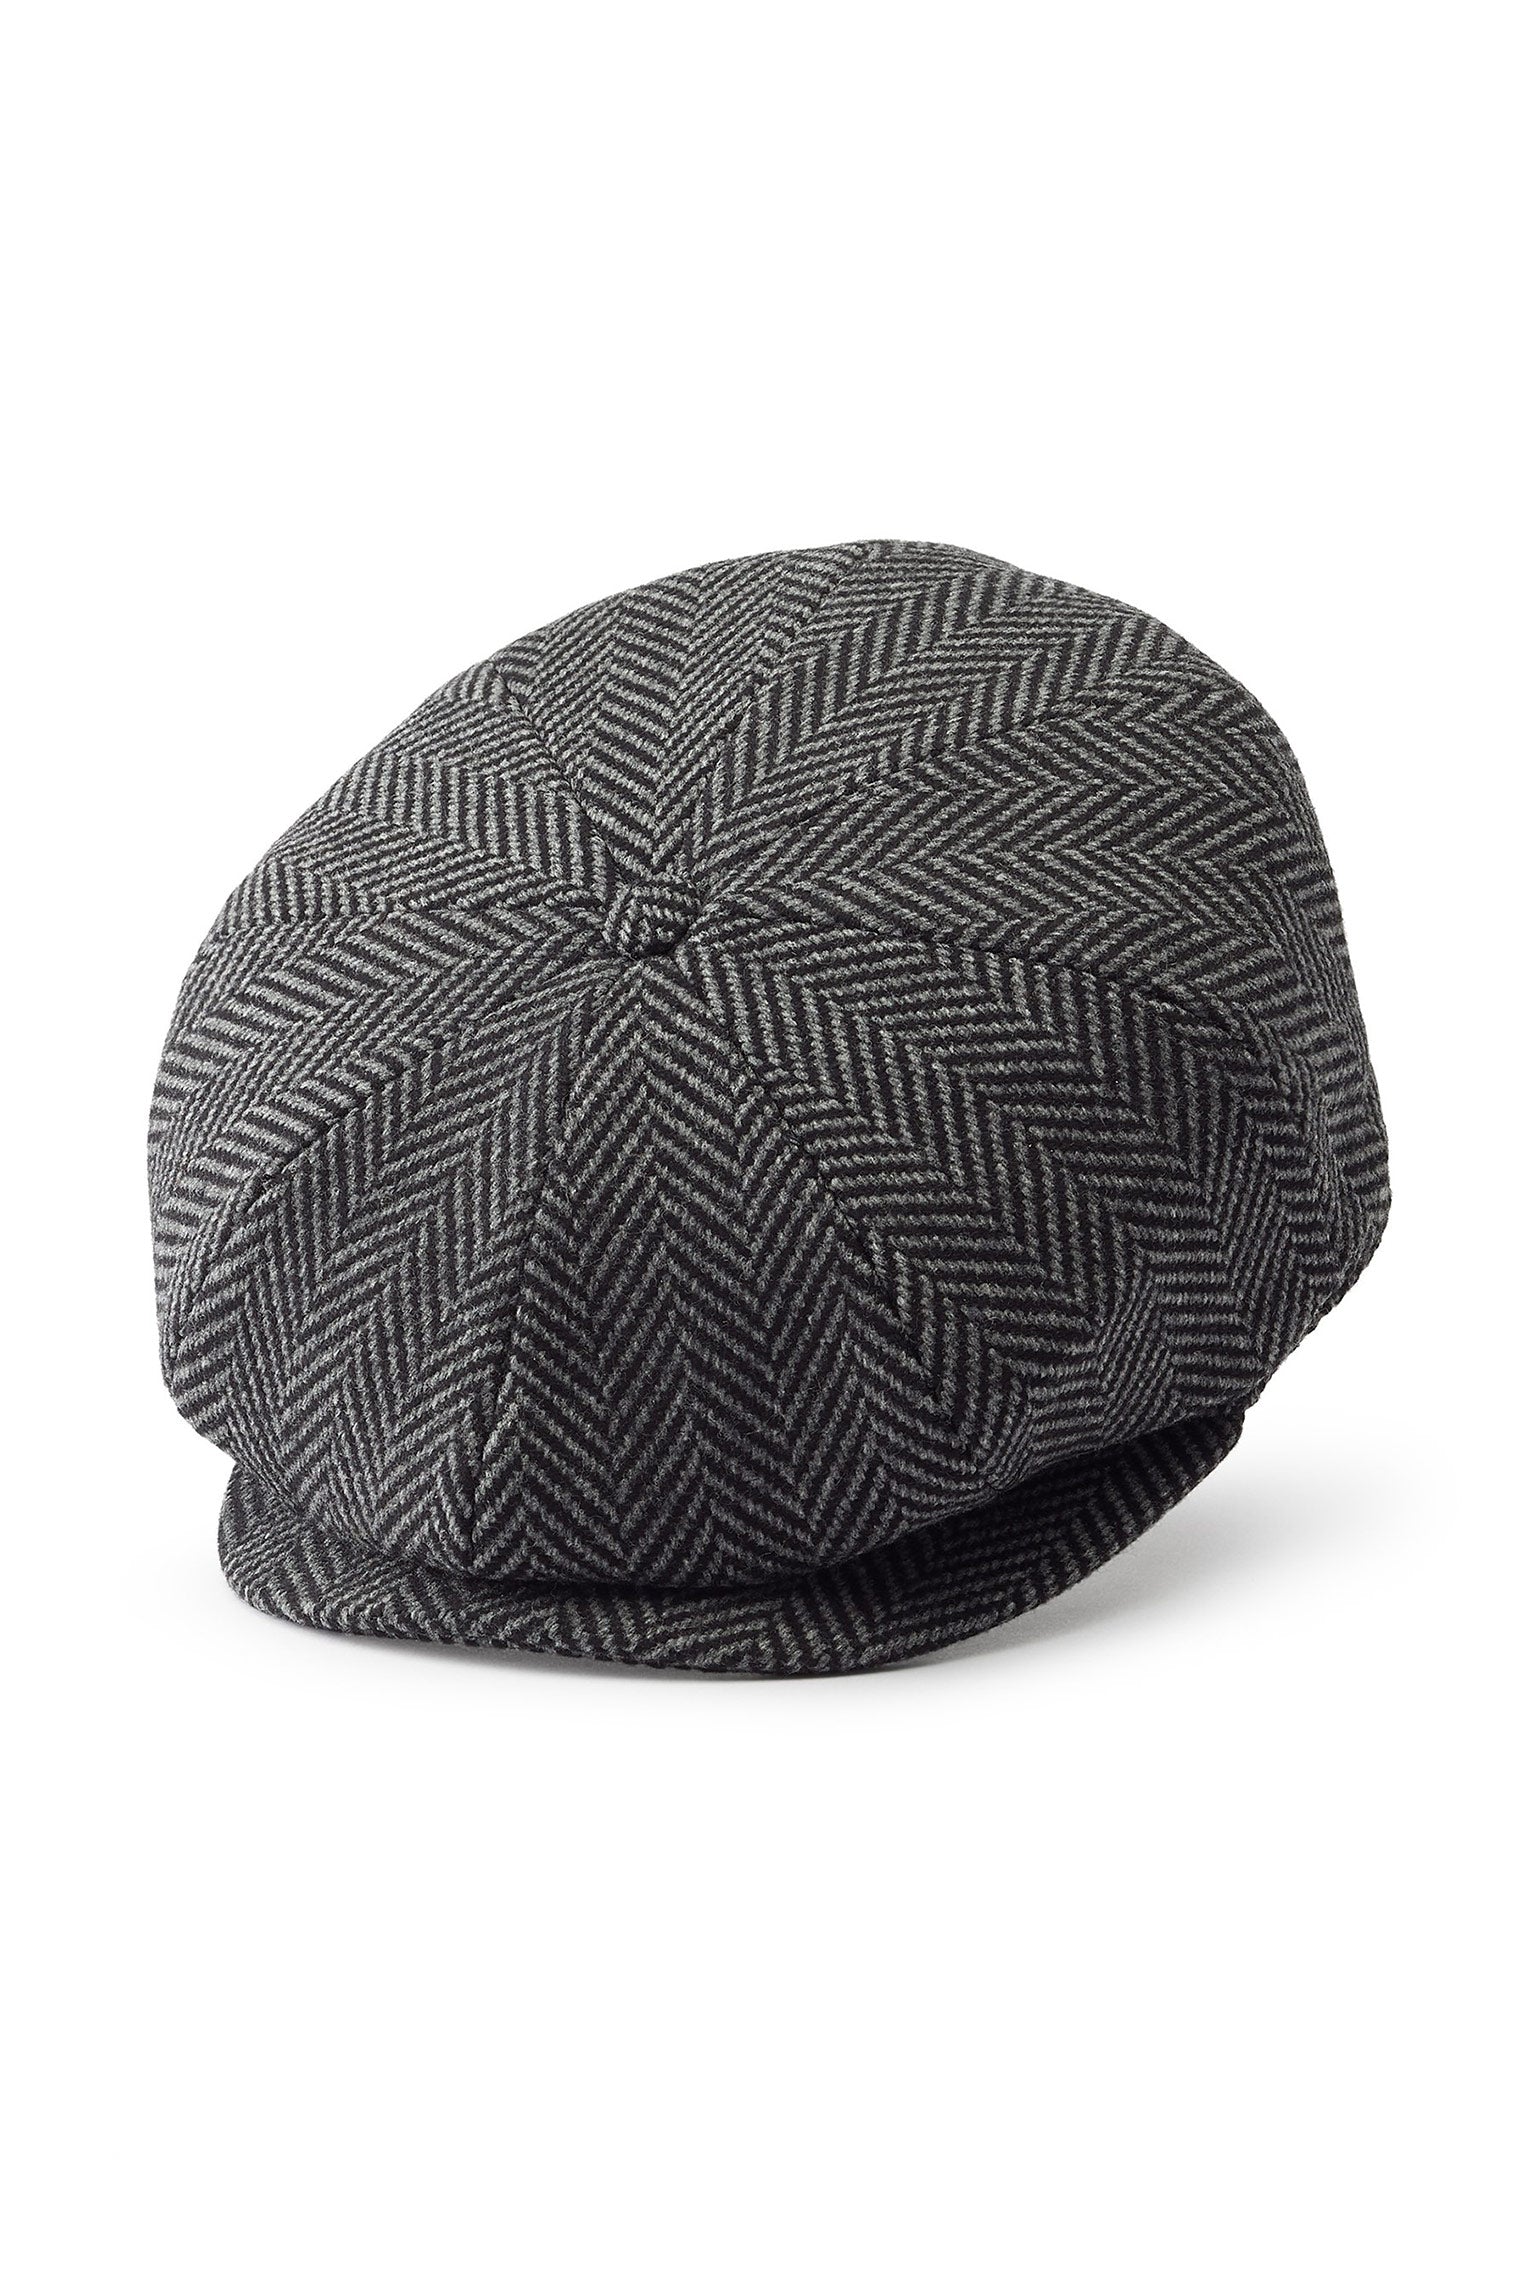 Escorial Wool Tremelo Bakerboy Cap - Products - Lock & Co. Hatters London UK